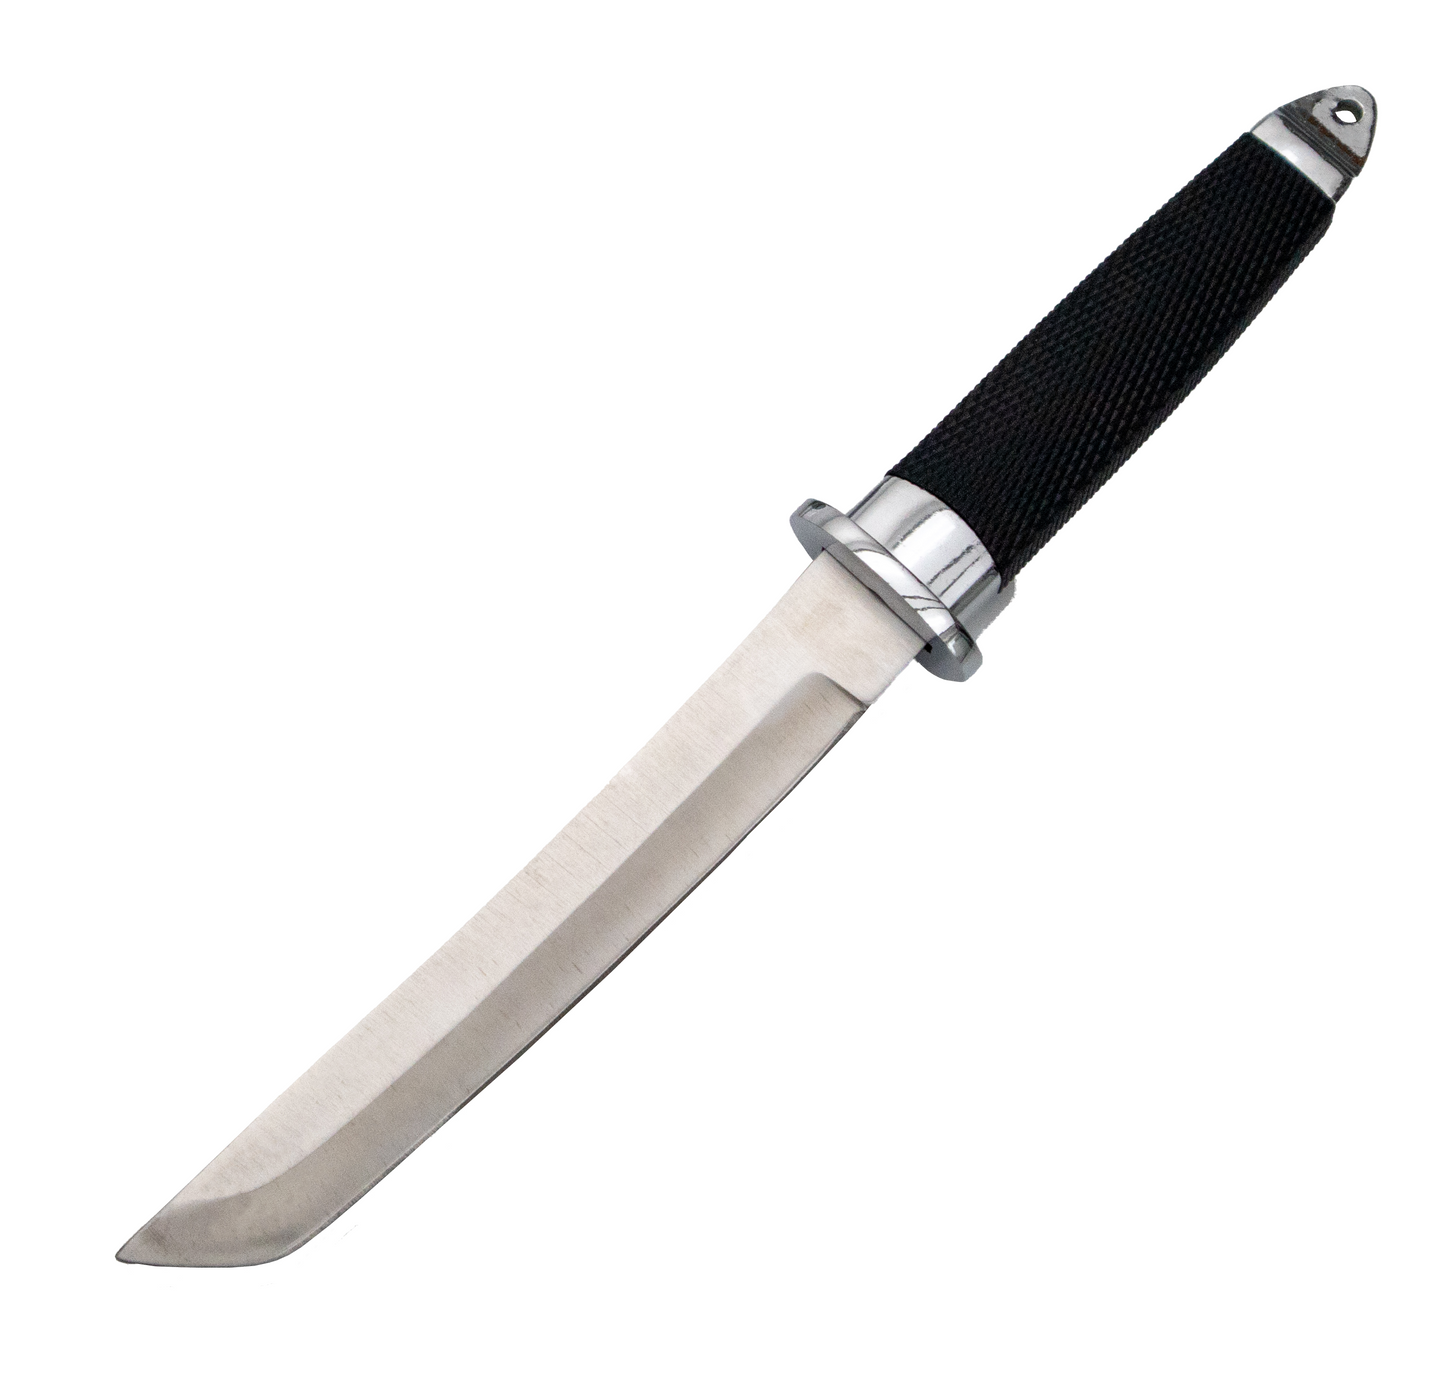 TANTO WARRIOR FIXED BLADE FULL TANG STAINLESS STEEL SURVIVAL KNIFE